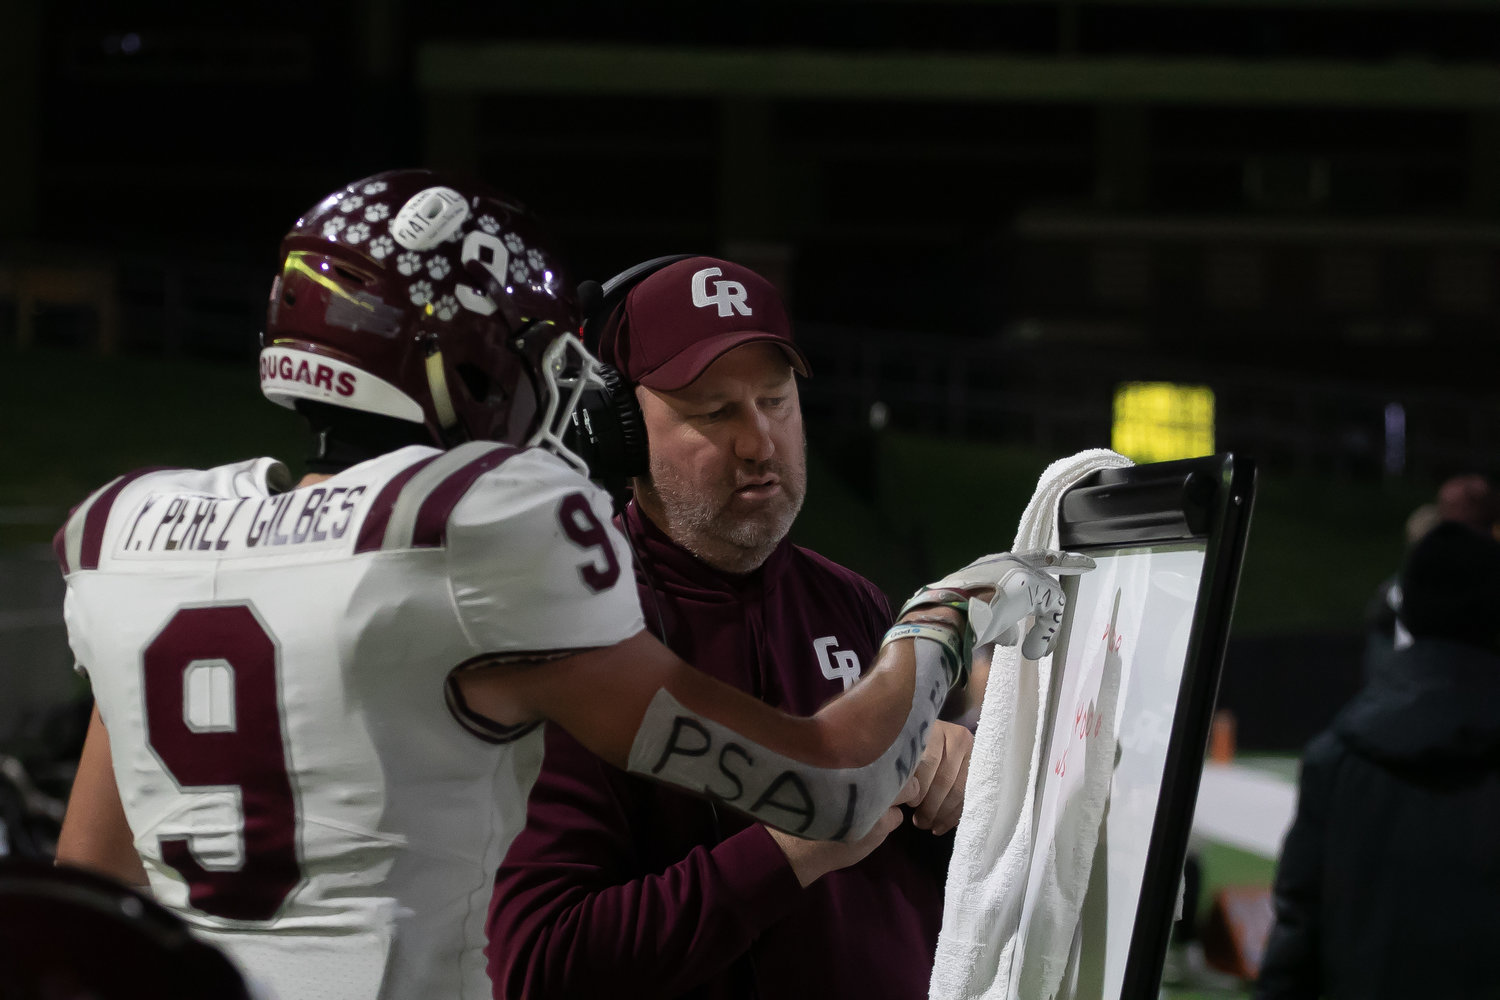 Yetxiel Perez-Gilbes talks with a coach on the sideline during Friday's Class 6A-Division I area round game between Cinco Ranch and Cy-Fair at Pridgeon Stadium.